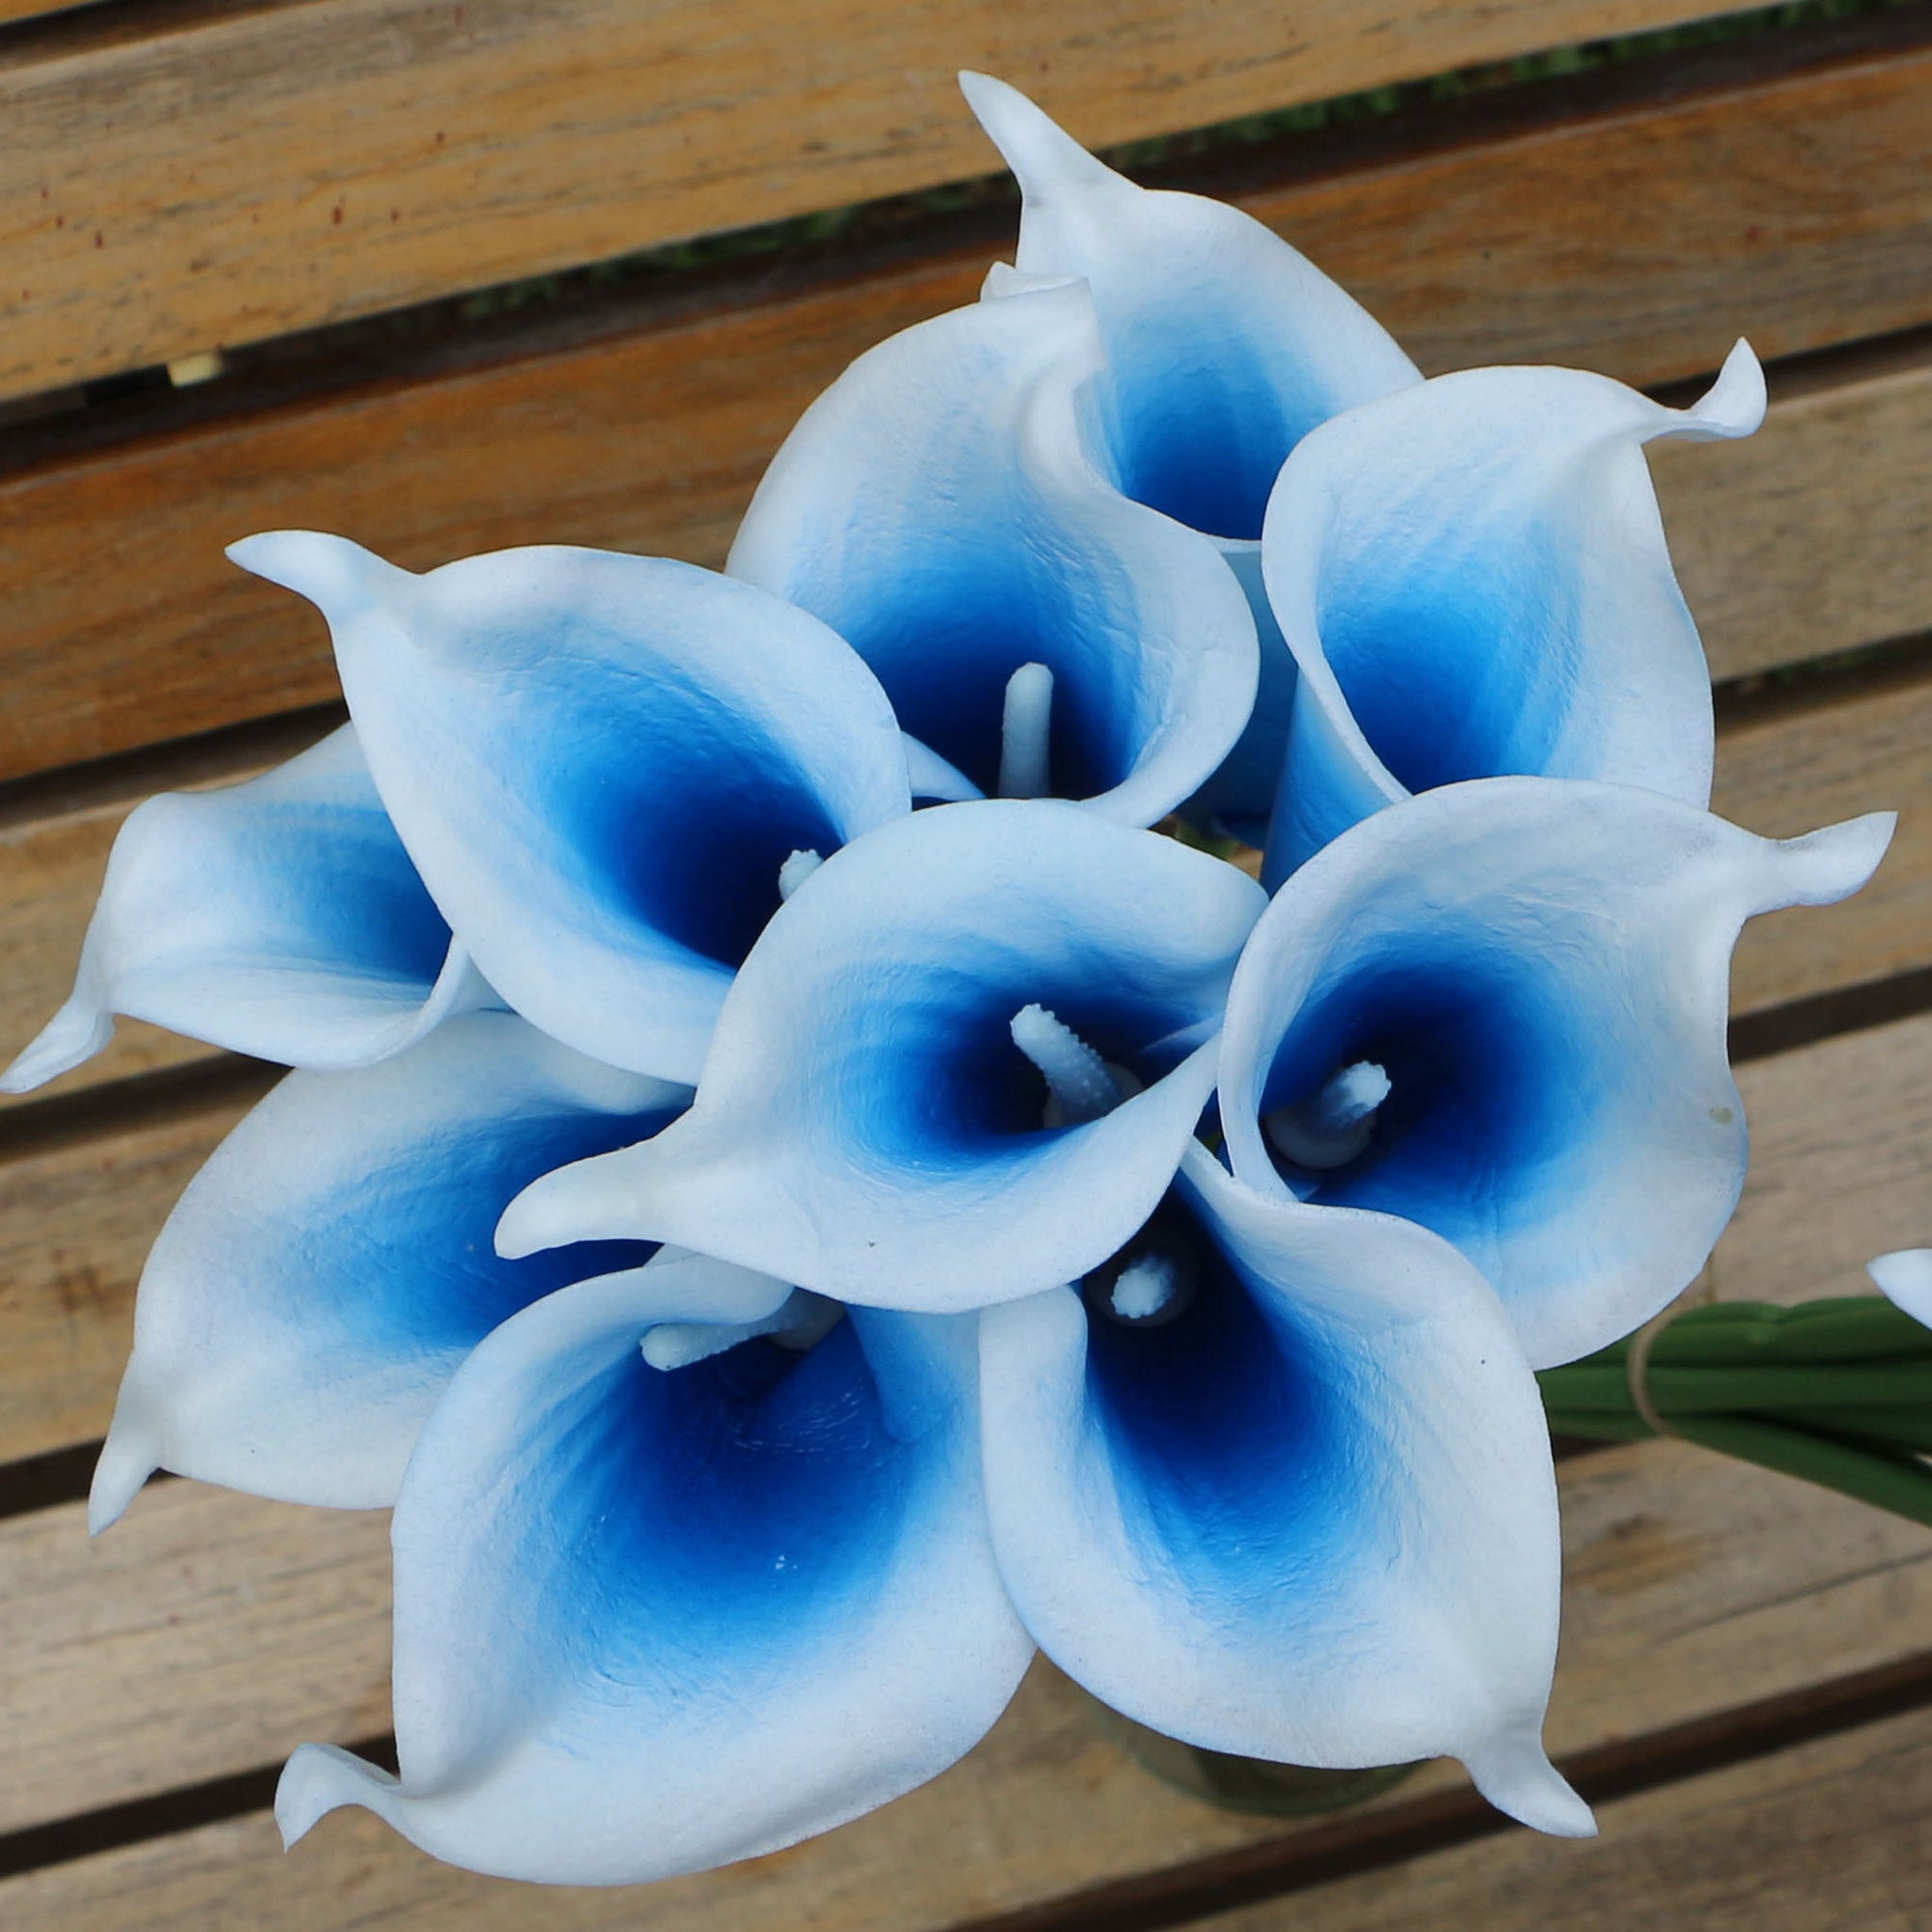 Picasso Calla Lily Blue Bridal Bouquet Wedding Flowers